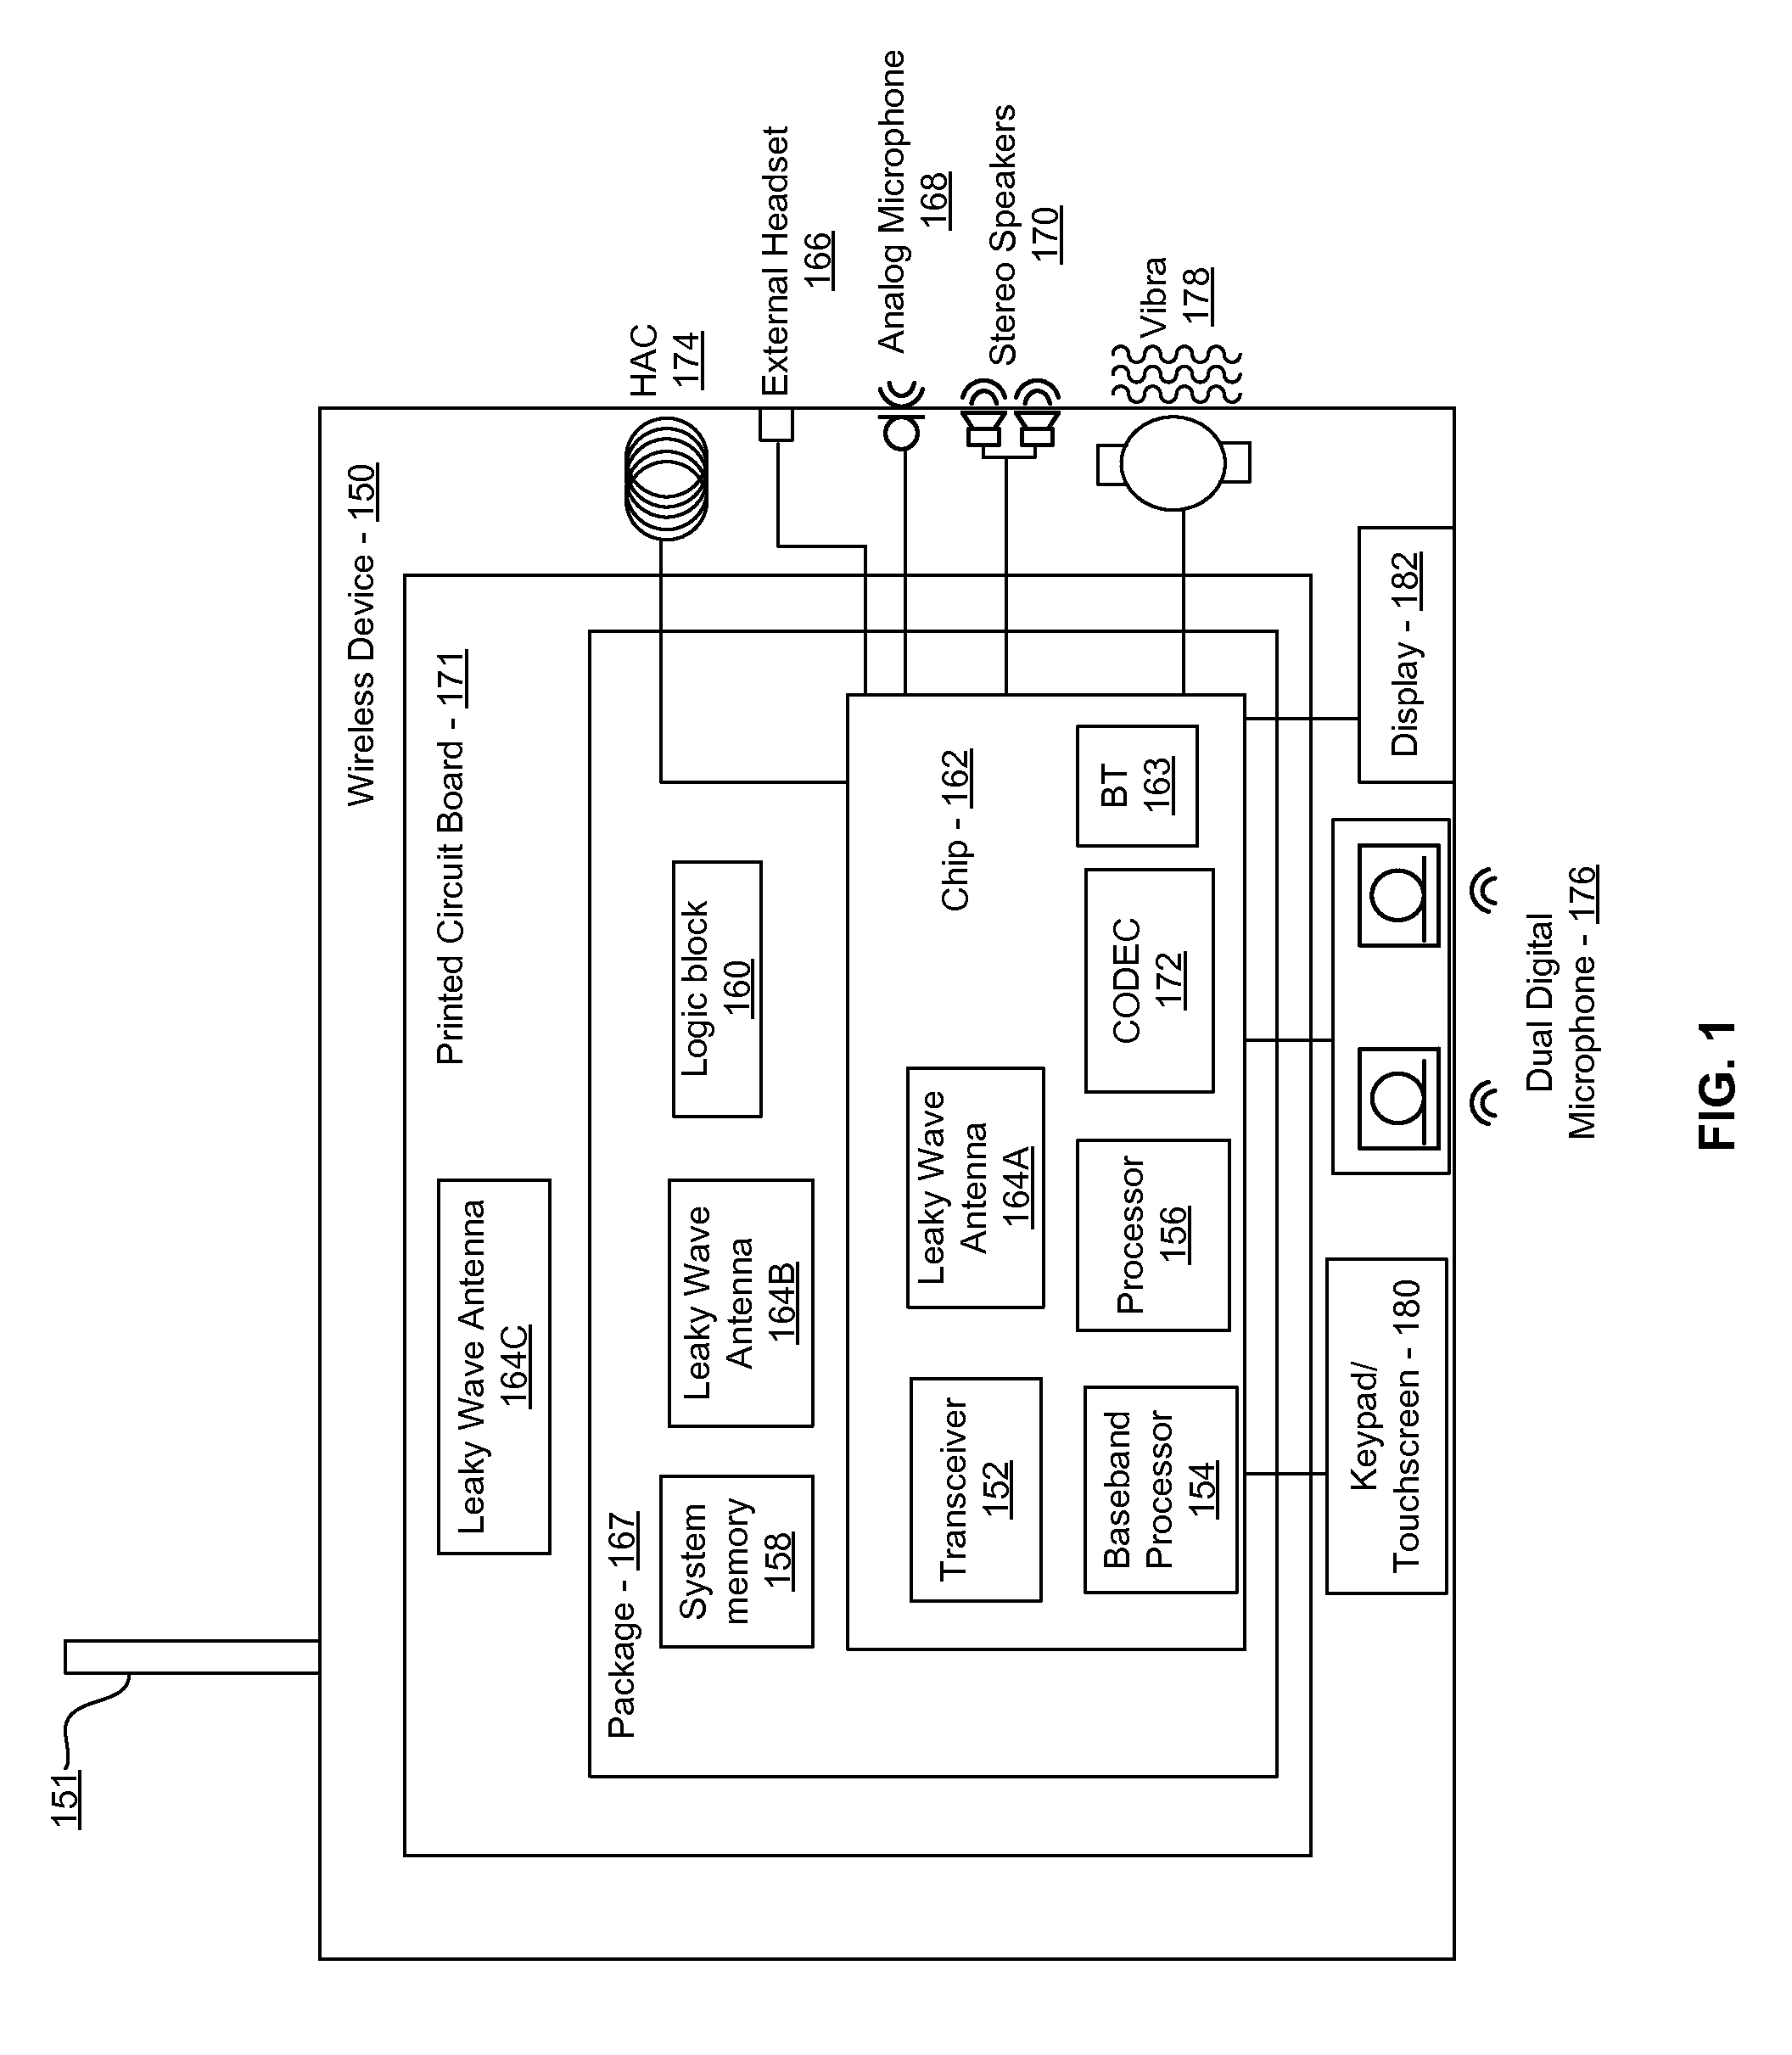 Method and System for a Sub-Harmonic Transmitter Utilizing a Leaky Wave Antenna